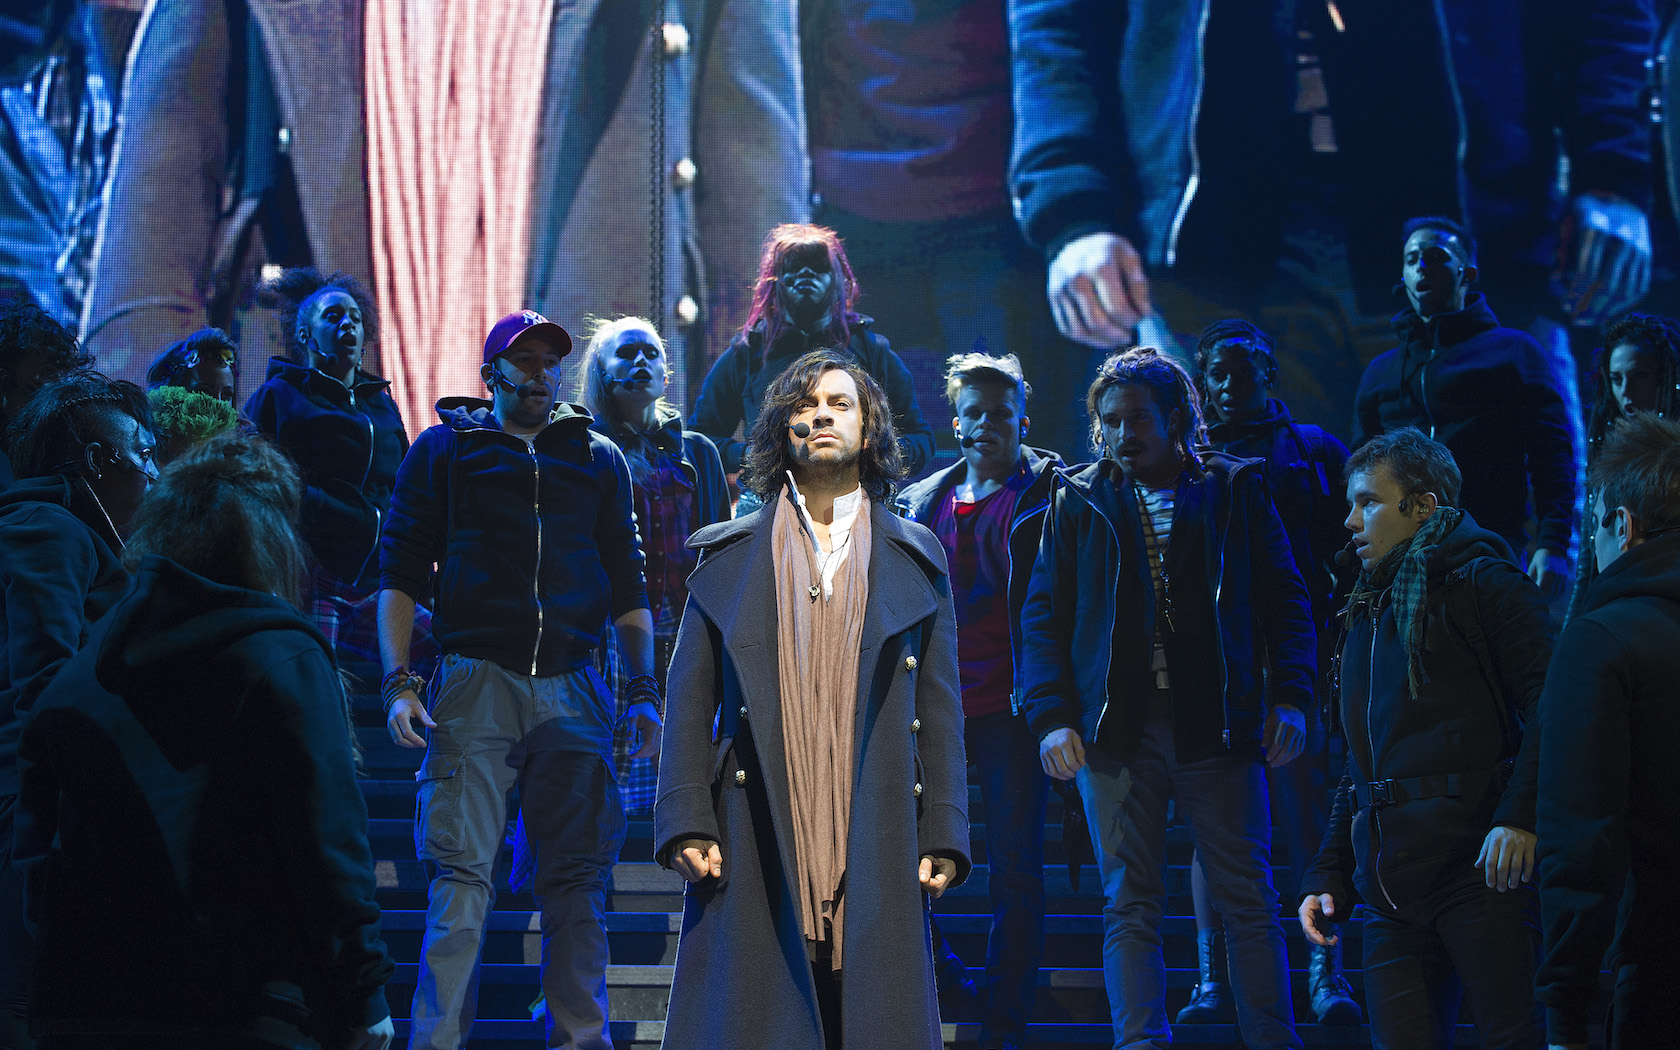 A scene from Jesus Christ Superstar by Andrew Lloyd Webber and Tim Rice @ O2 Arena, London.